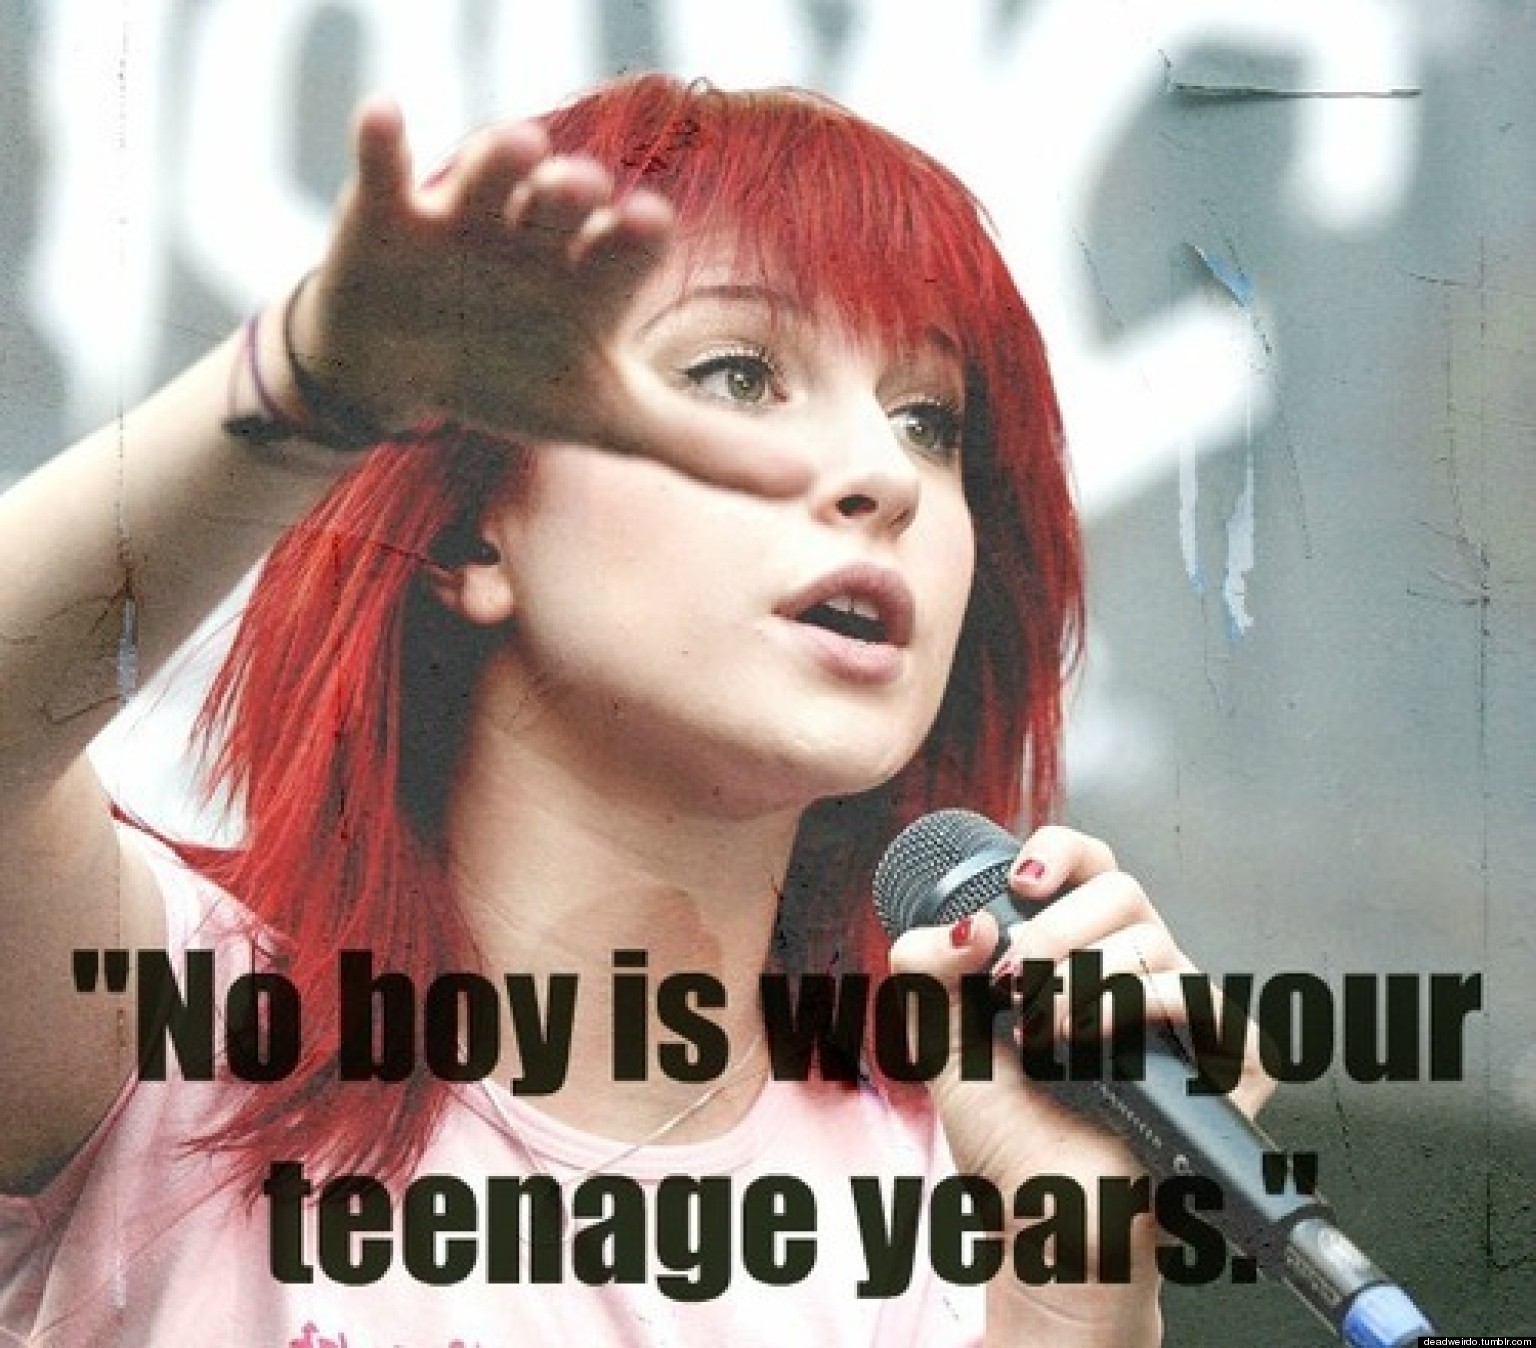 Hayley Williams Quotes 15 Inspirational Sayings From Paramore Singer